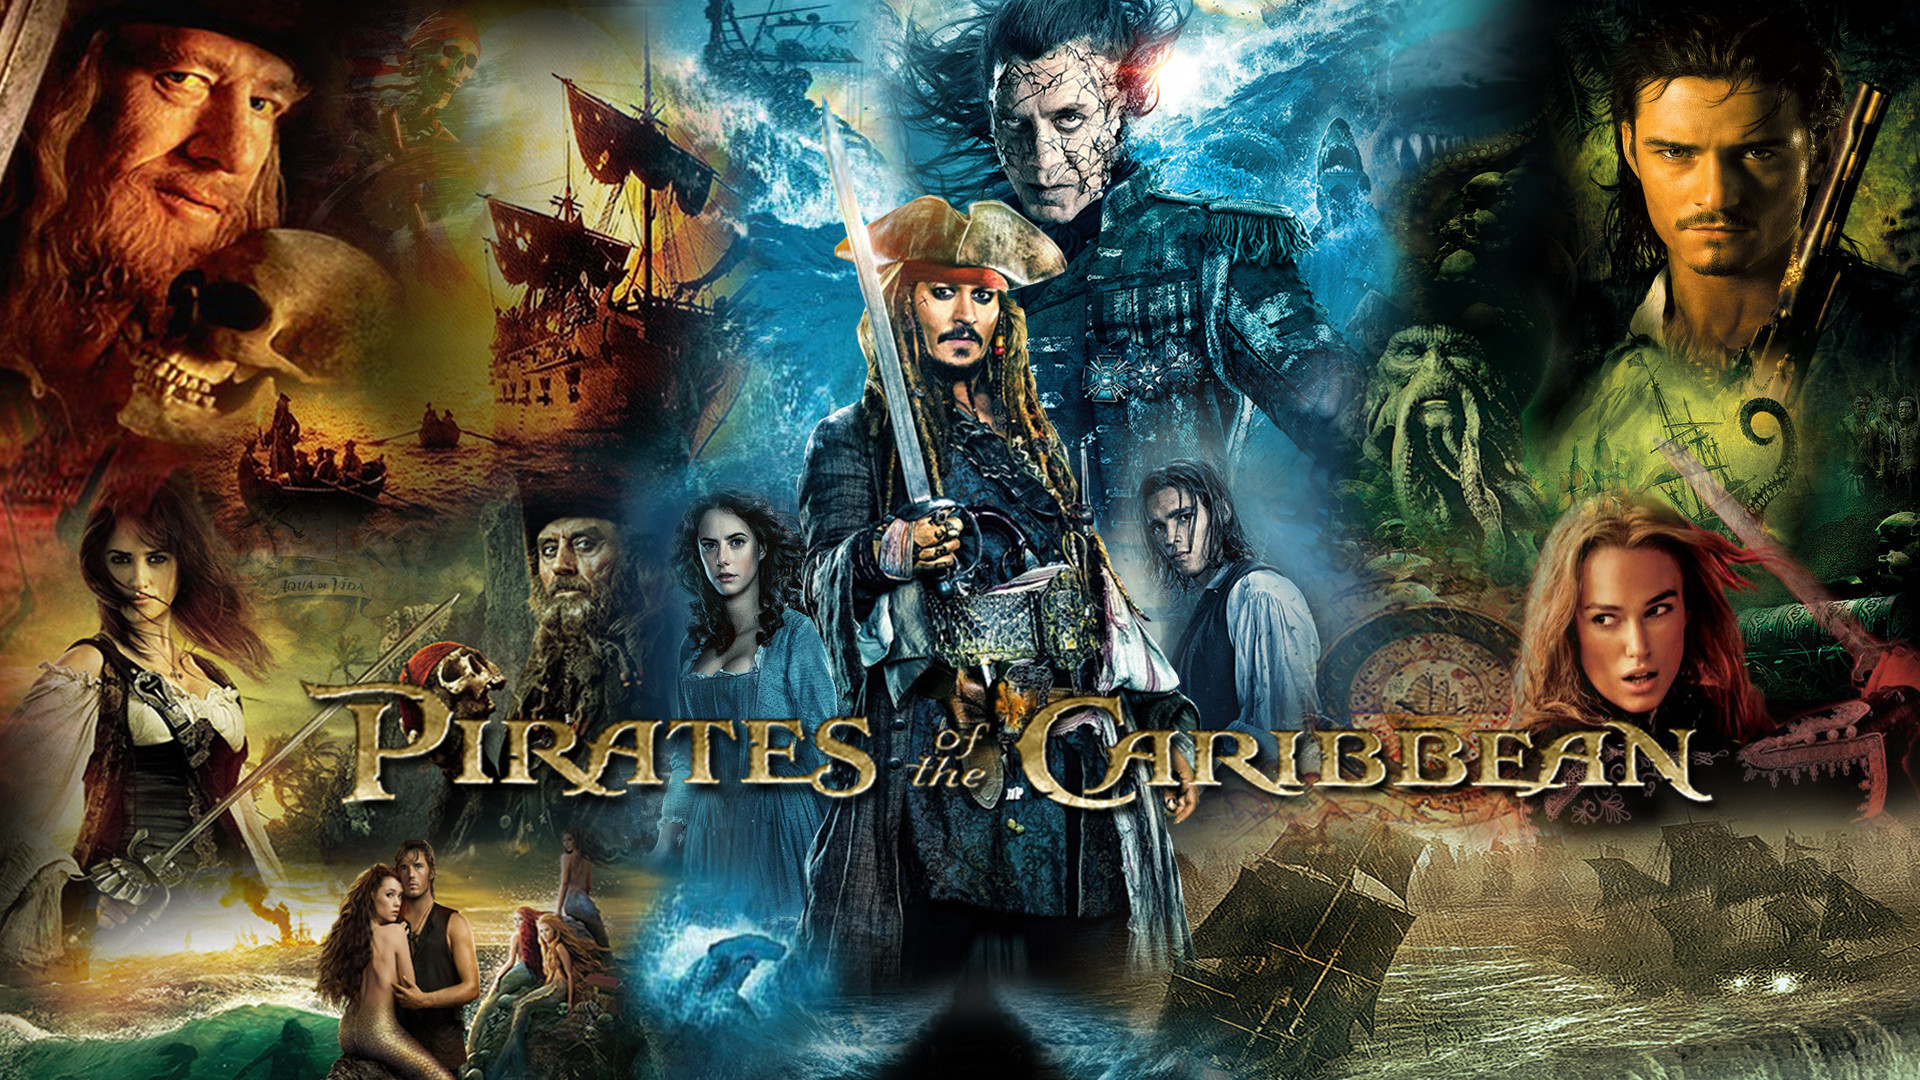 1920x1080 Pirates of the Caribbean 1-5 Series Wallpaper by The-